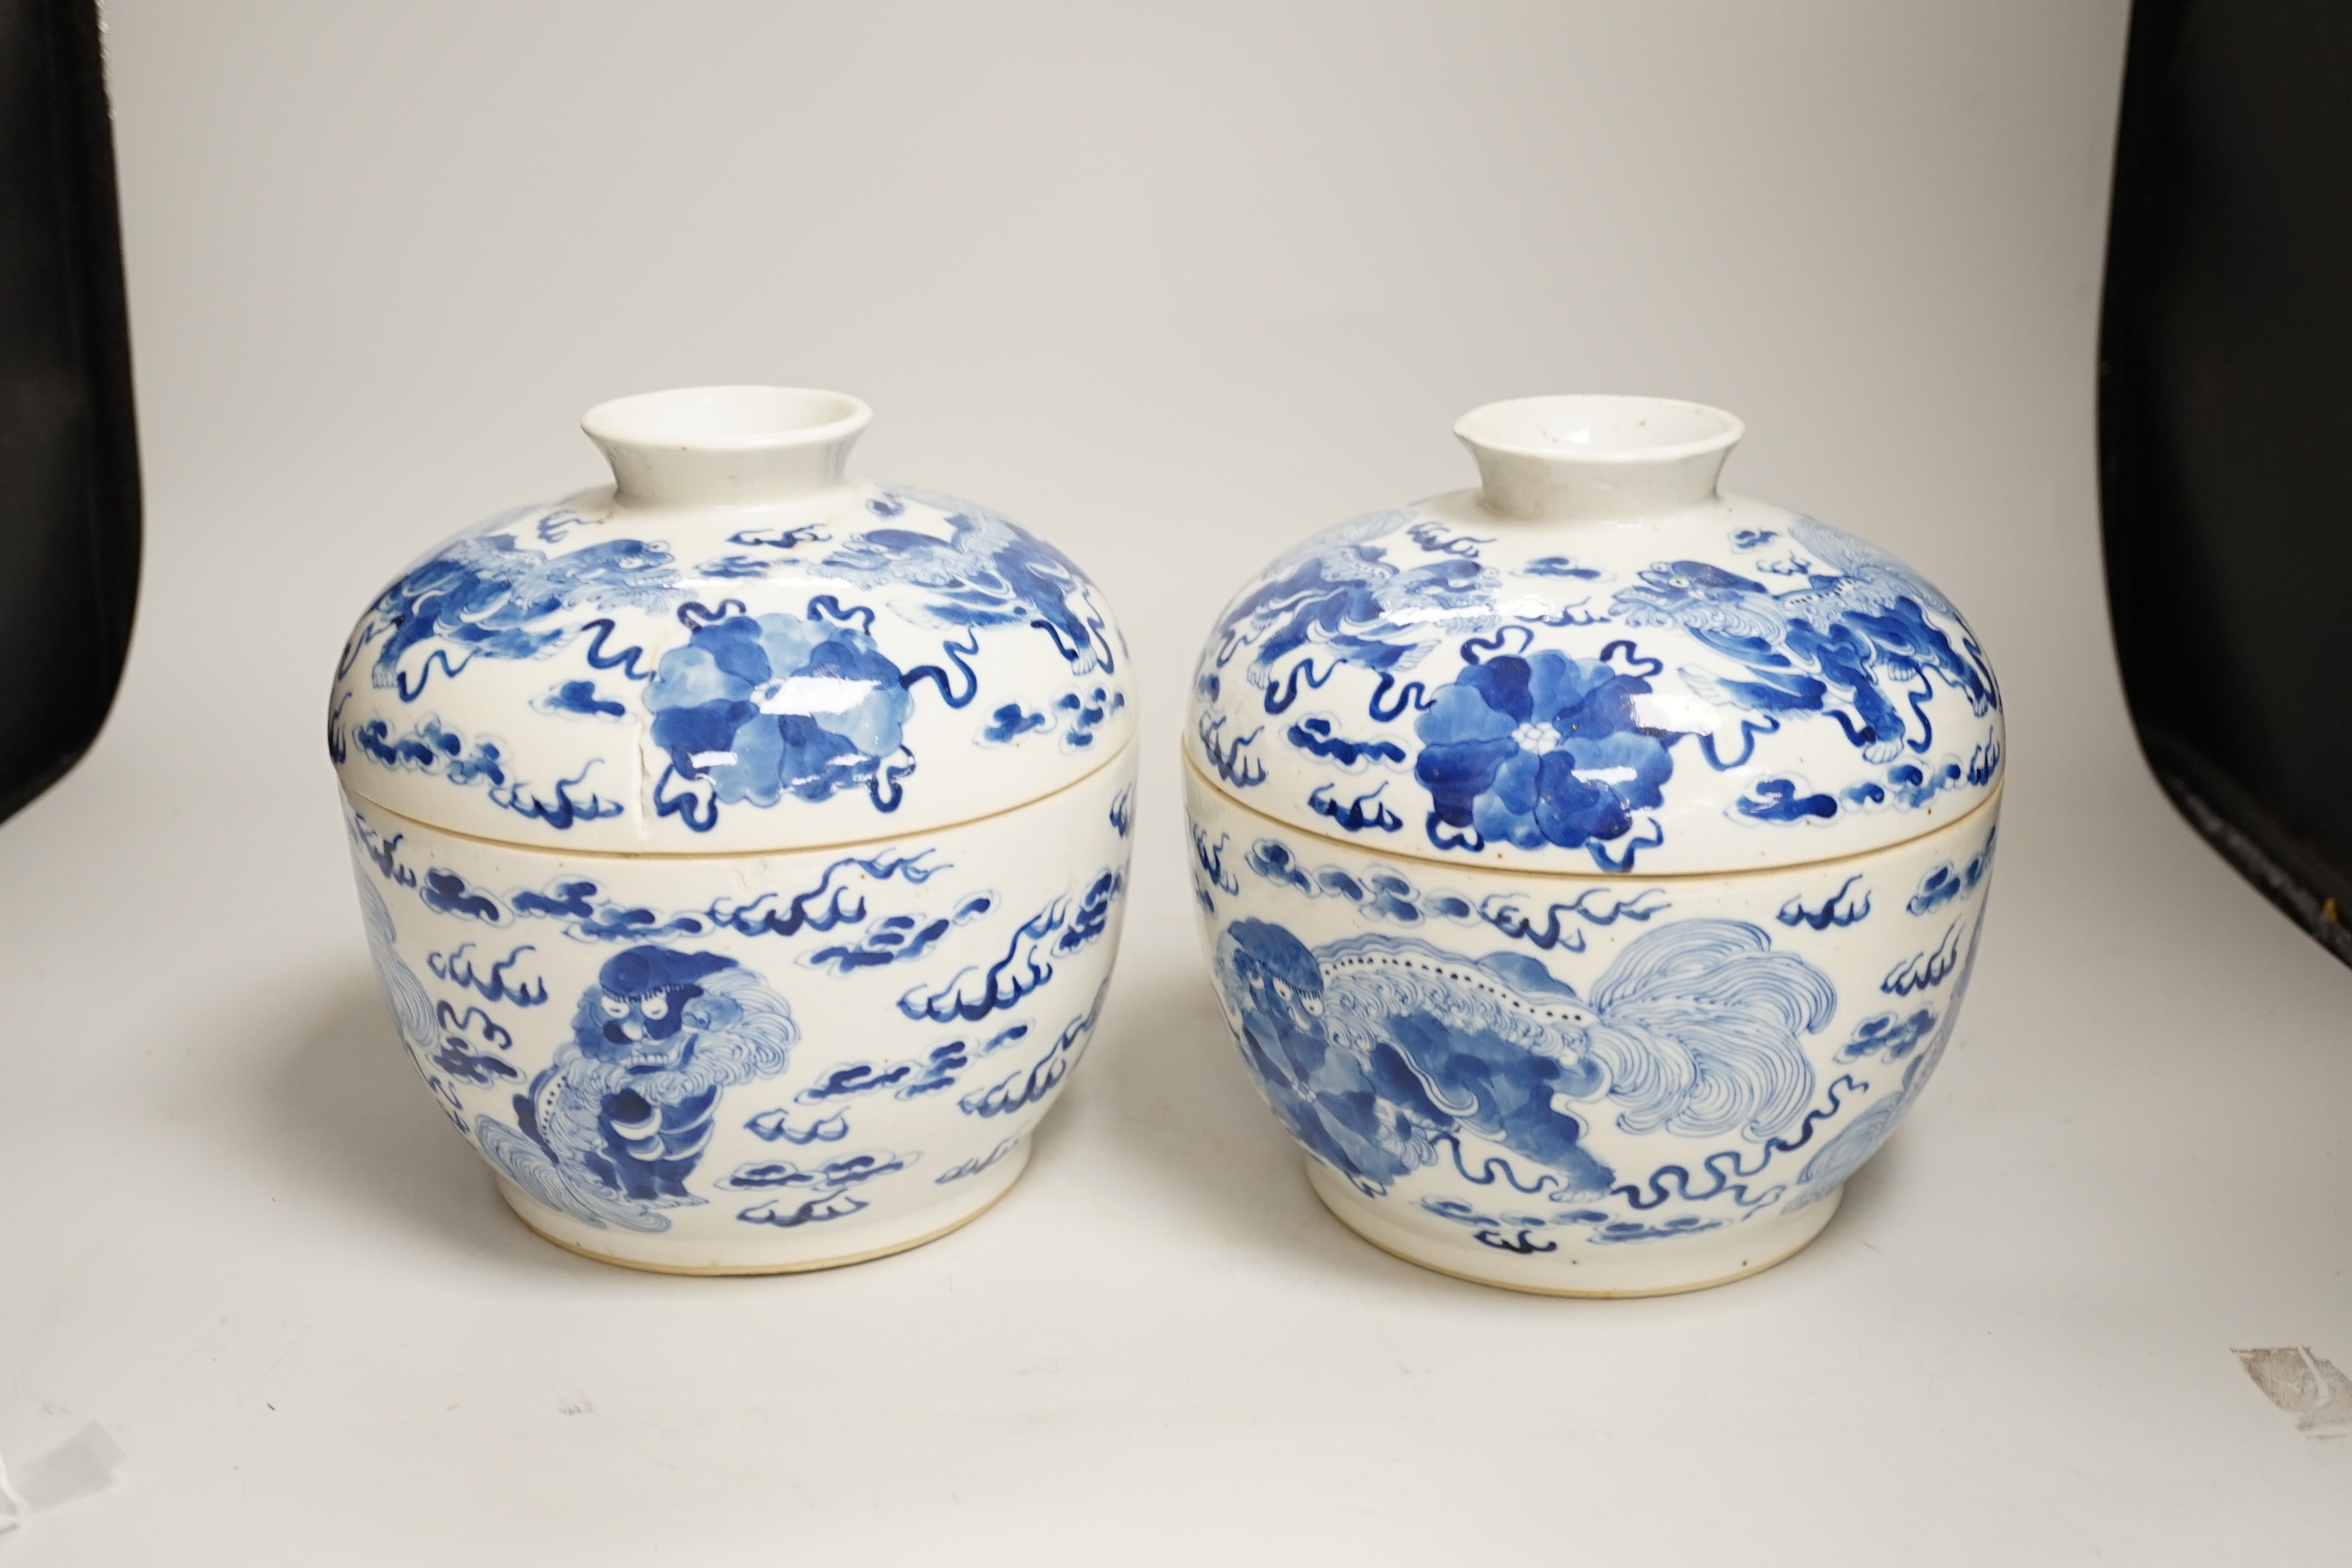 A pair of Chinese blue and white 'Buddhist lion' bowls and covers, chupu, probably made for the Straits market, late 19th century, 20cm high